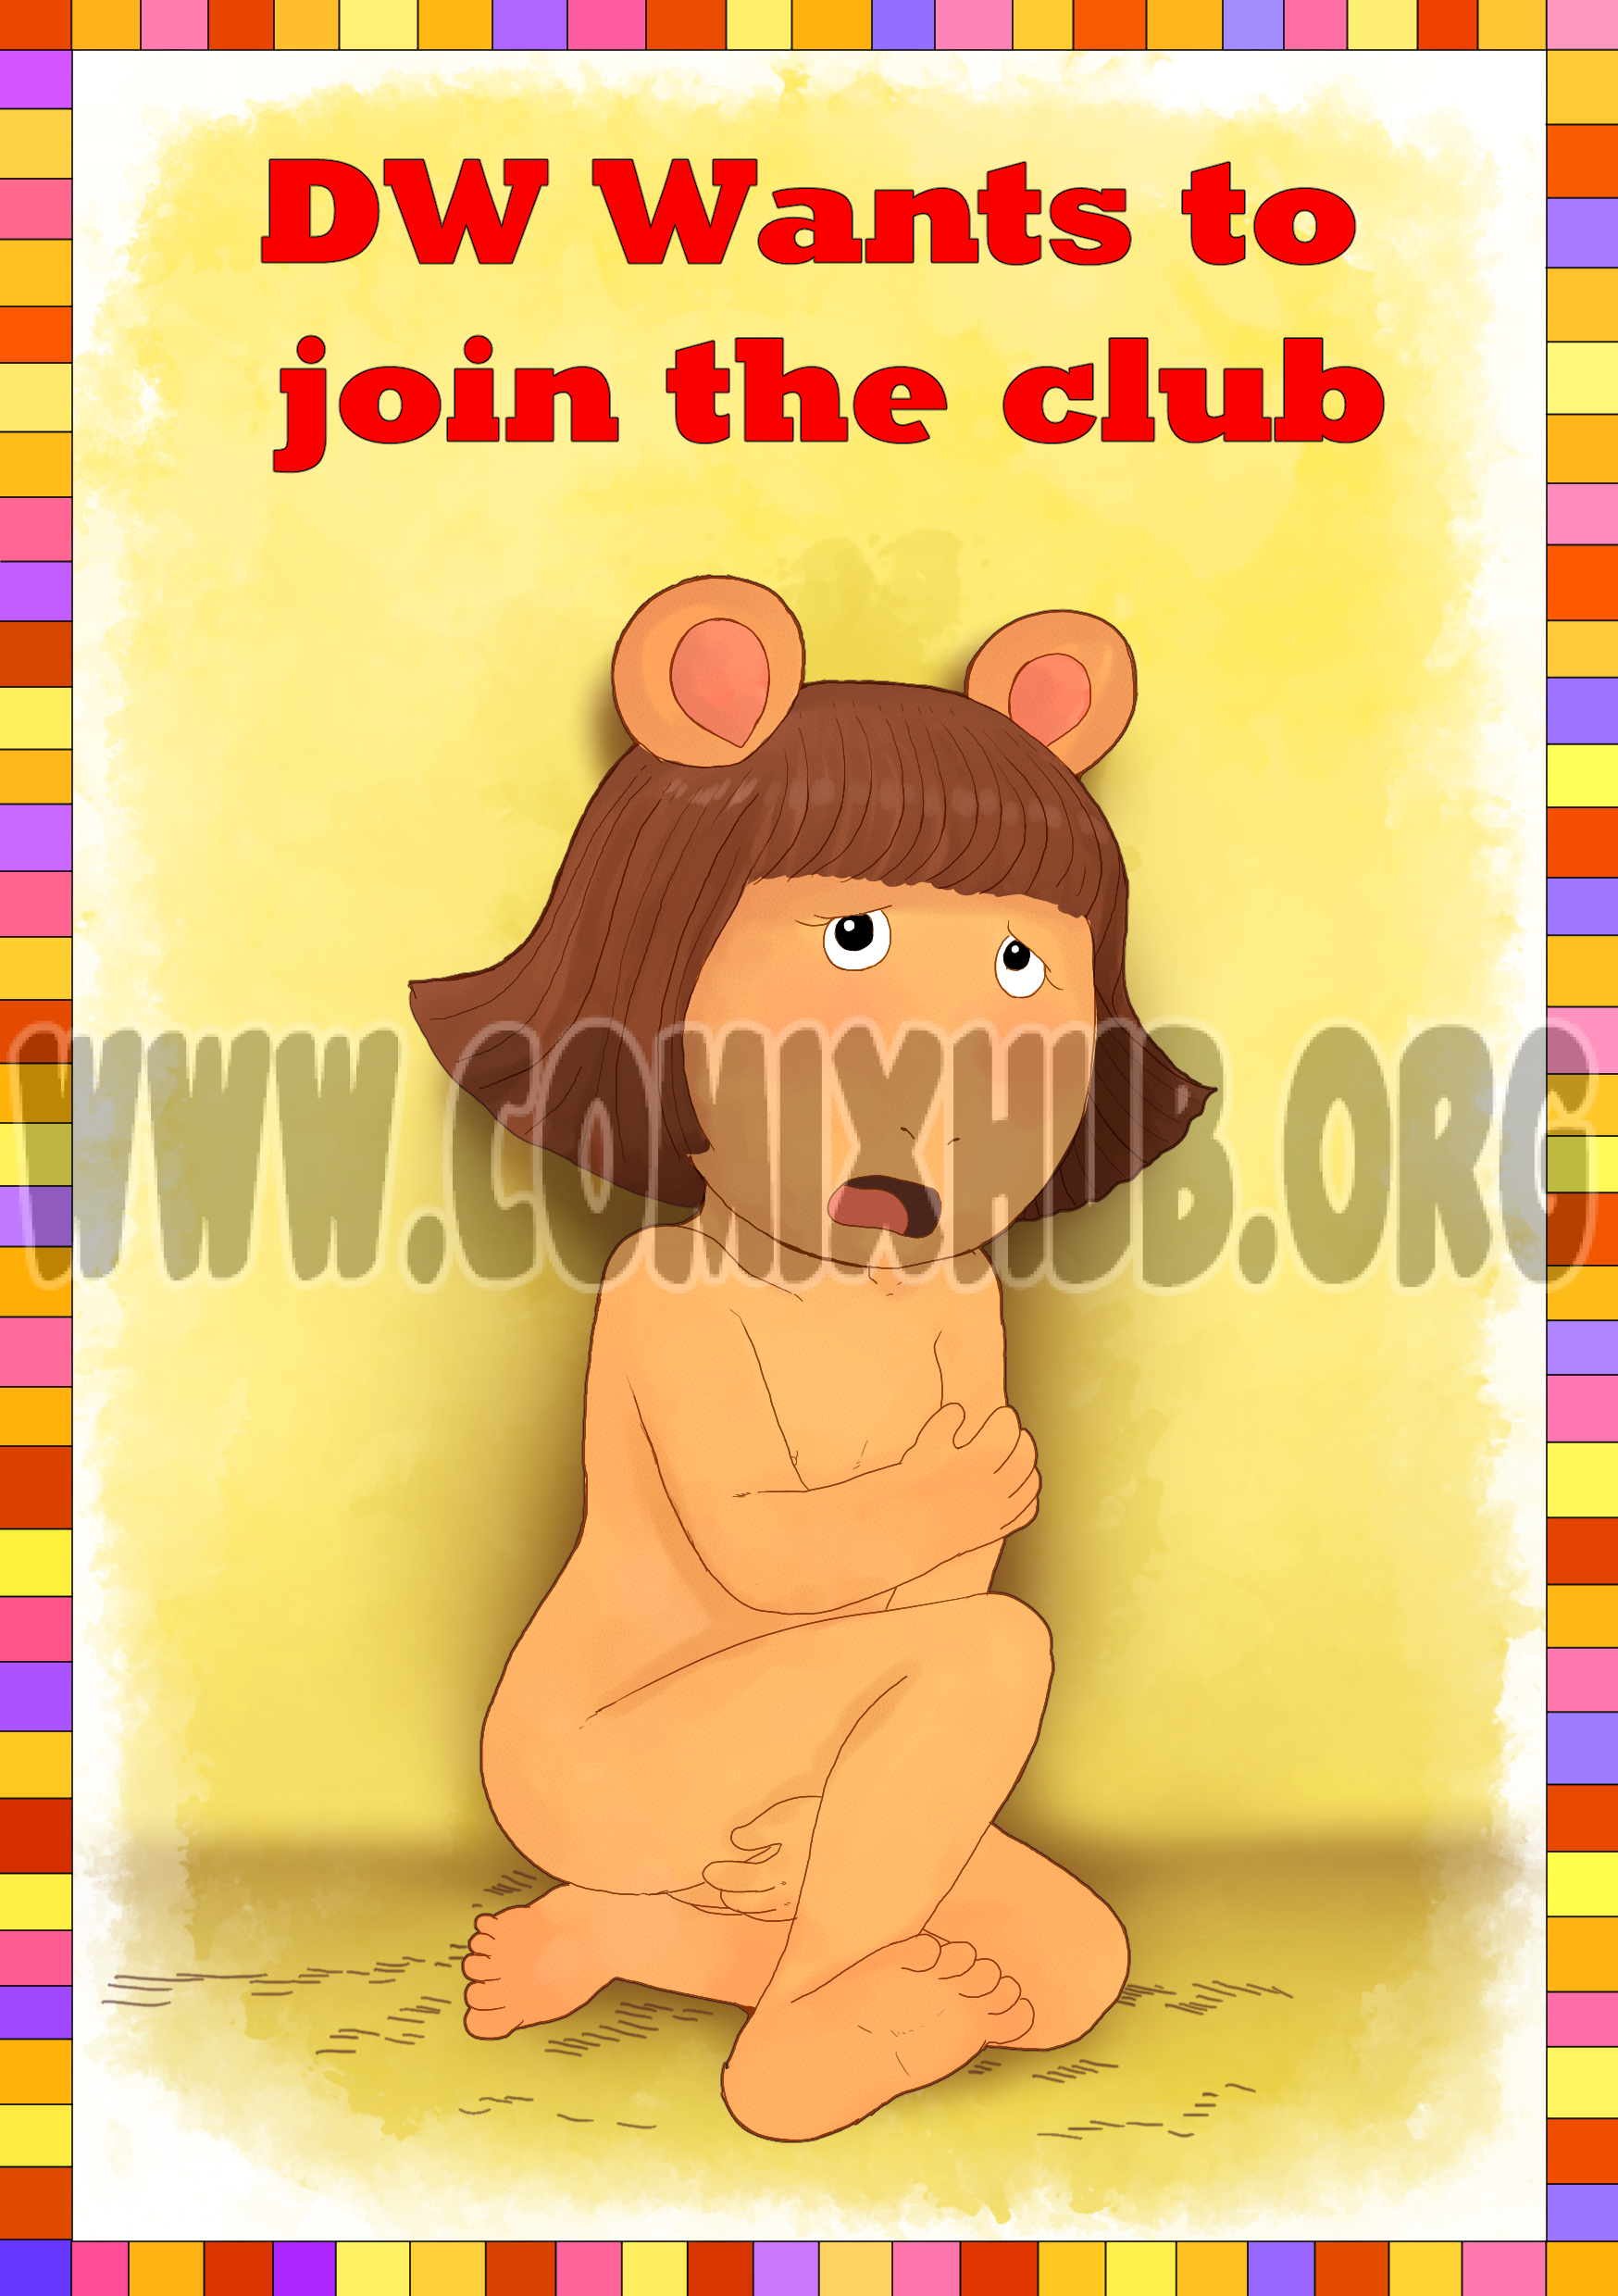 Dw Wants To Join The Club porn comics Oral sex, Anal Sex, BDSM, Blowjob, Cum Shots, Furry, Gangbang, Gay, Group Sex, Lolicon, Sex Toys